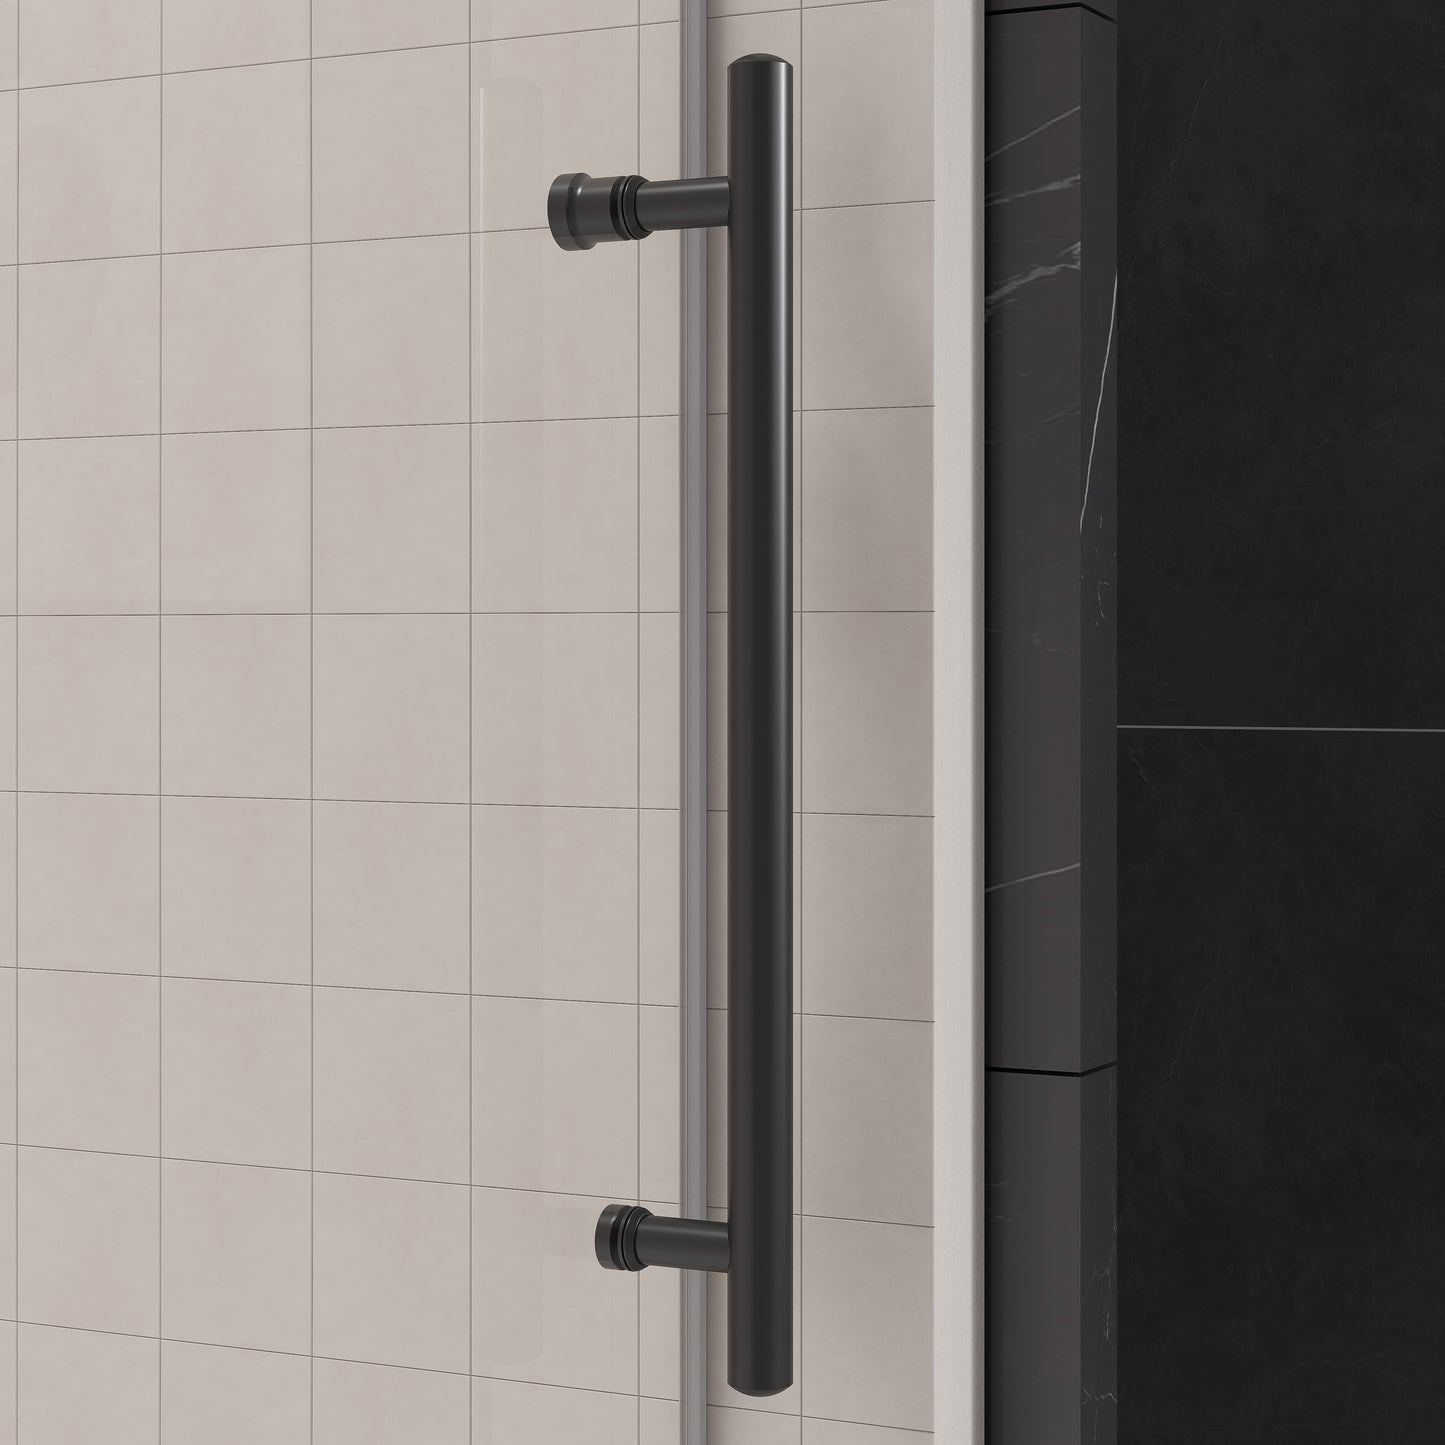 Gorgeous Single Sliding Frameless Tub Shower Door With 3/8 Inch Clear Glass color:matte black